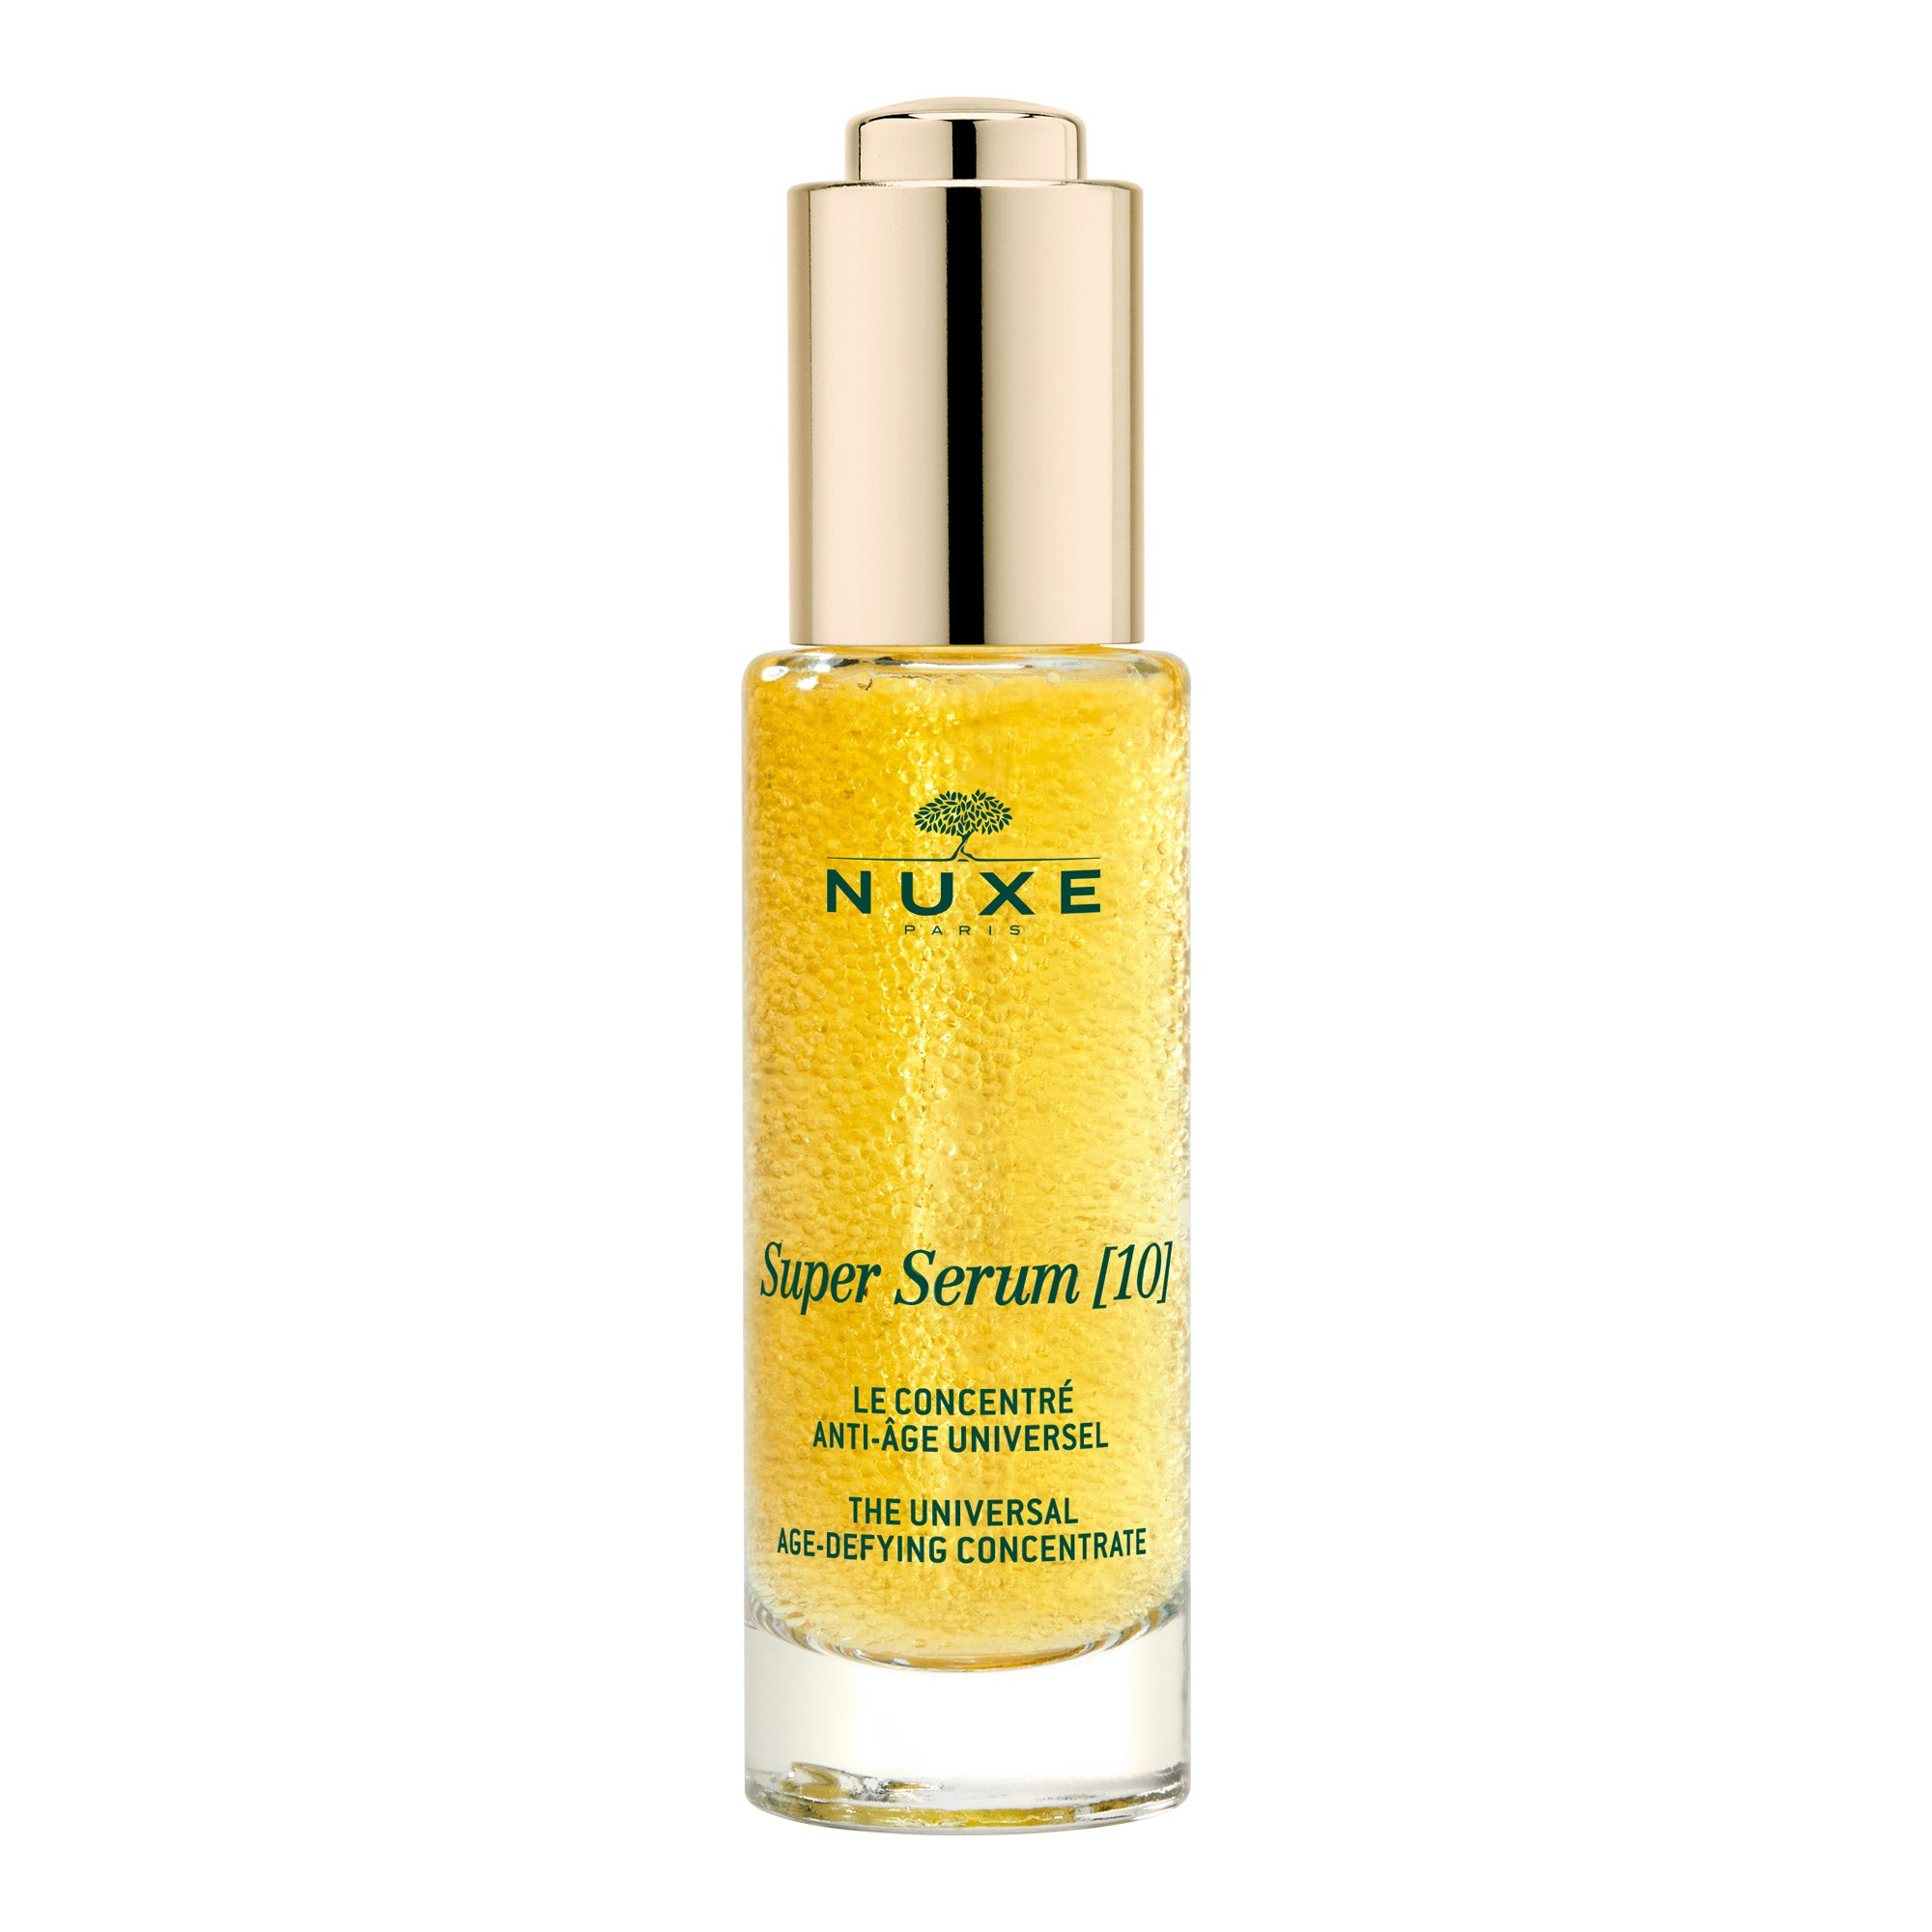 Nuxe Super Serum 10 - The universal anti-ageing concentrate